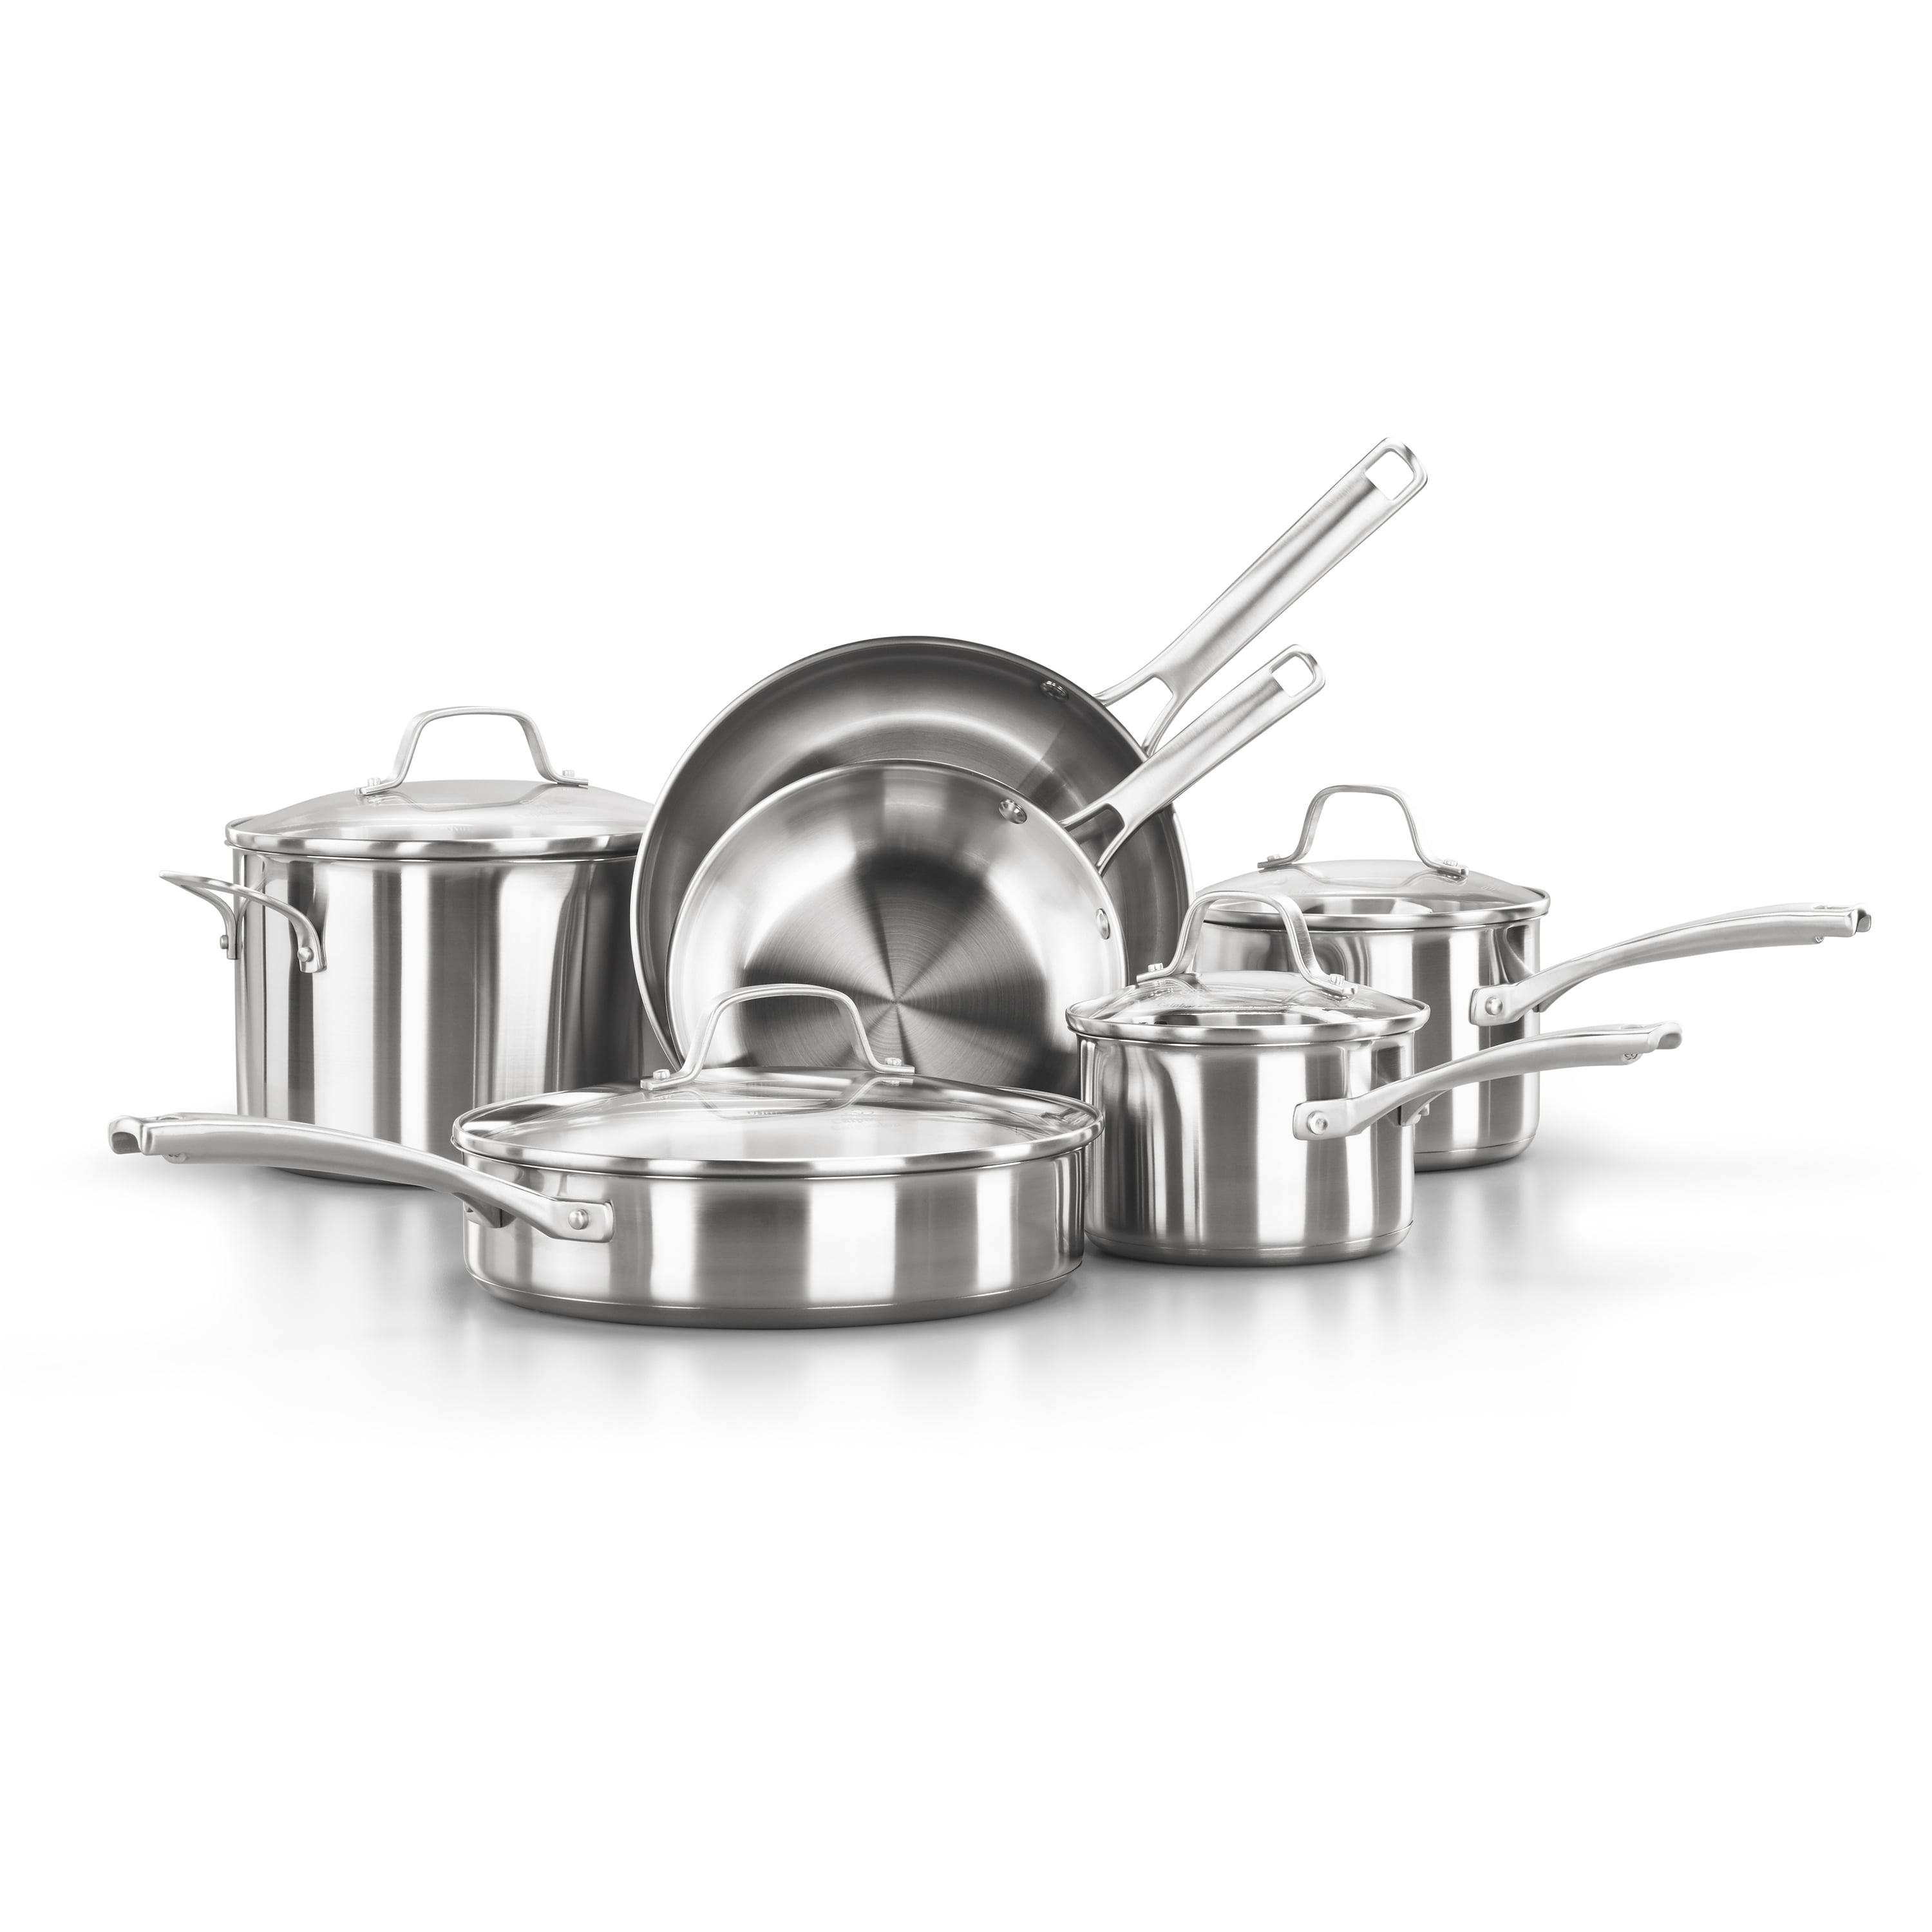 Photo 1 of Calphalon Classic Stainless Steel Pots and Pans, 10-Piece Cookware Set